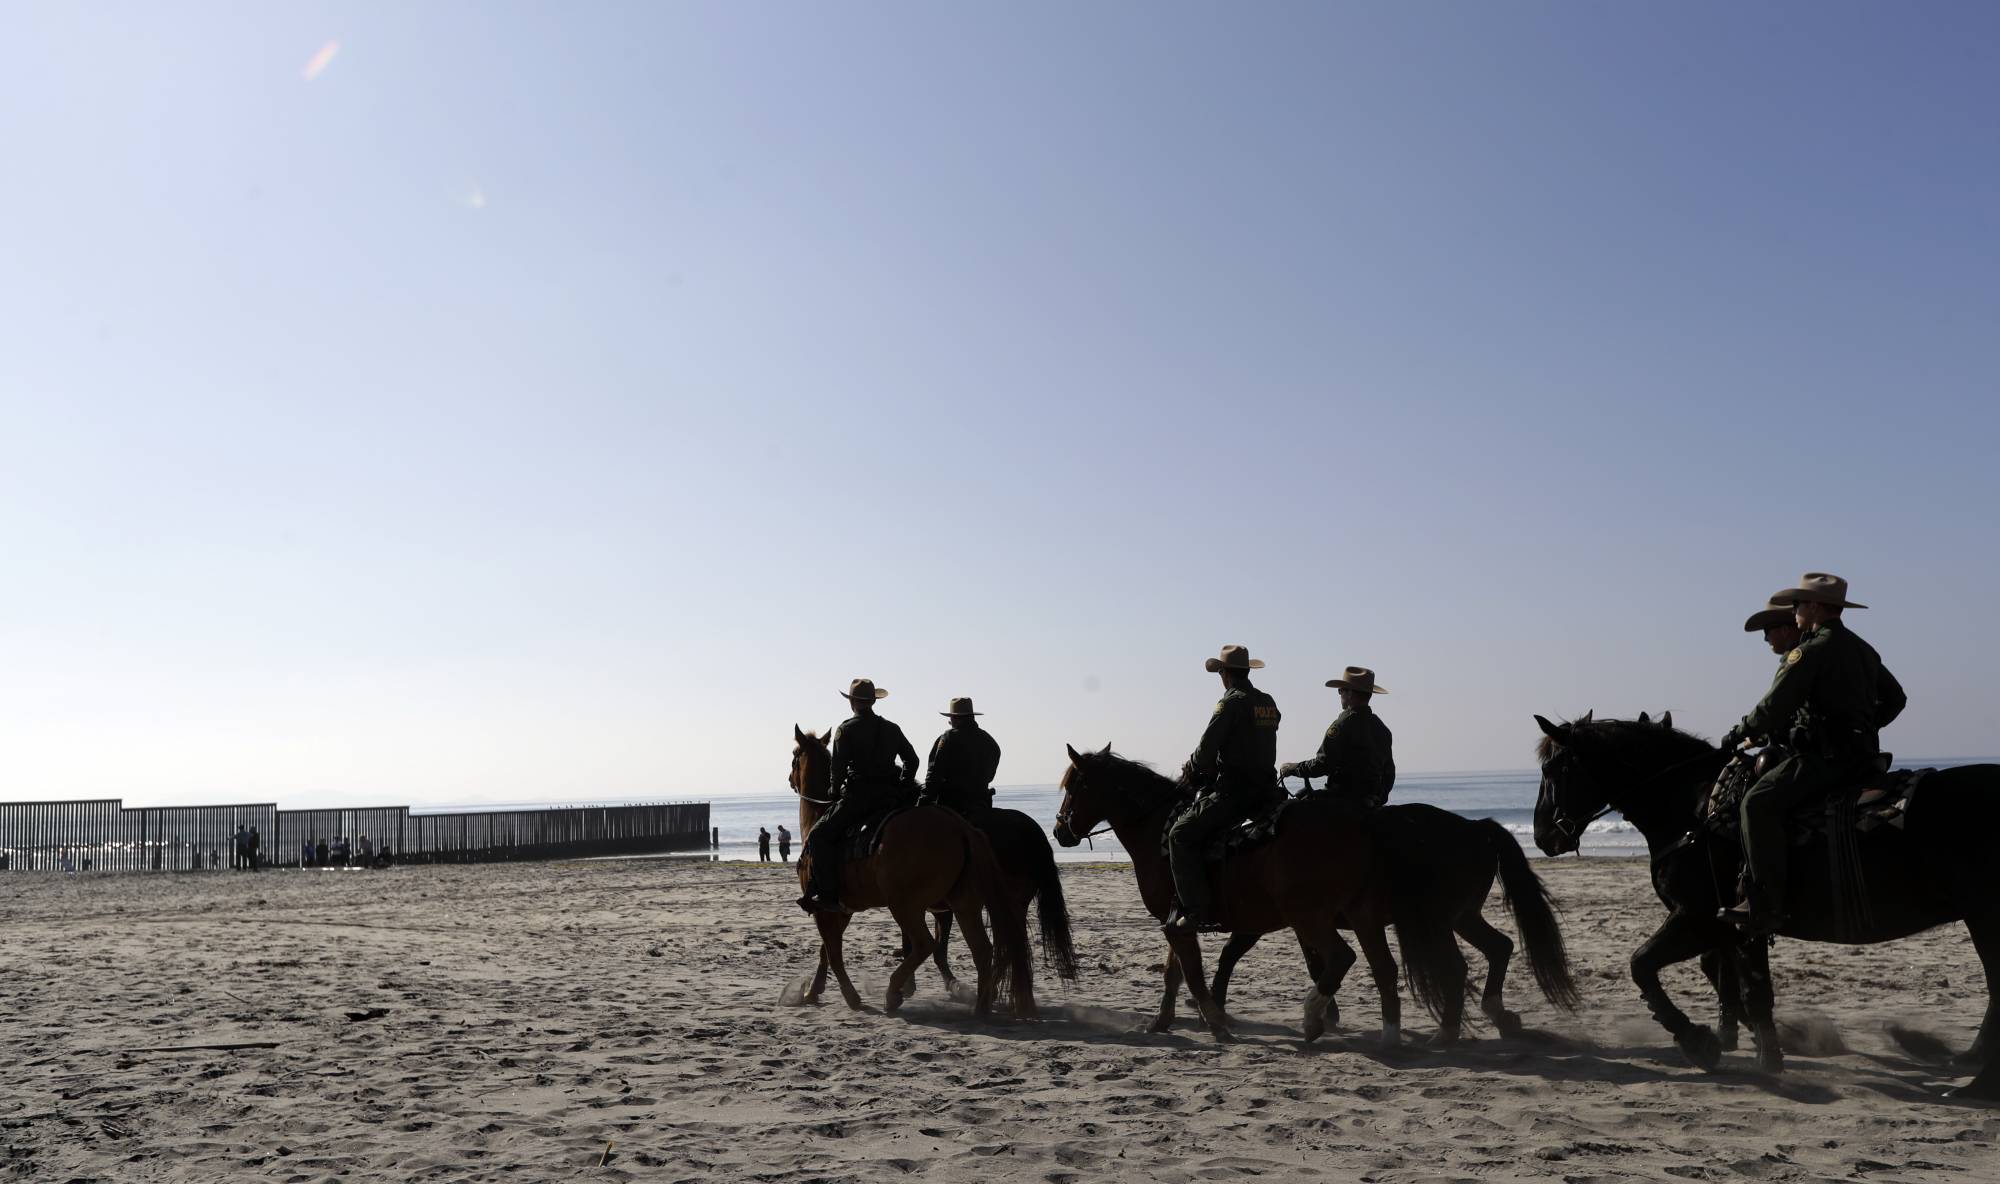 United States Border Patrol agents mounted on horseback ride near the border with Tijuana, Mexico, before a visit by Secretary of Homeland Security Kirstjen Nielsen Tuesday, Nov. 20, 2018, in San Diego. Nielsen said Tuesday an appeal will be filed on the decision by a judge to bar the Trump administration from refusing asylum to migrants who cross the southern border illegally. (AP Photo/Gregory Bull)